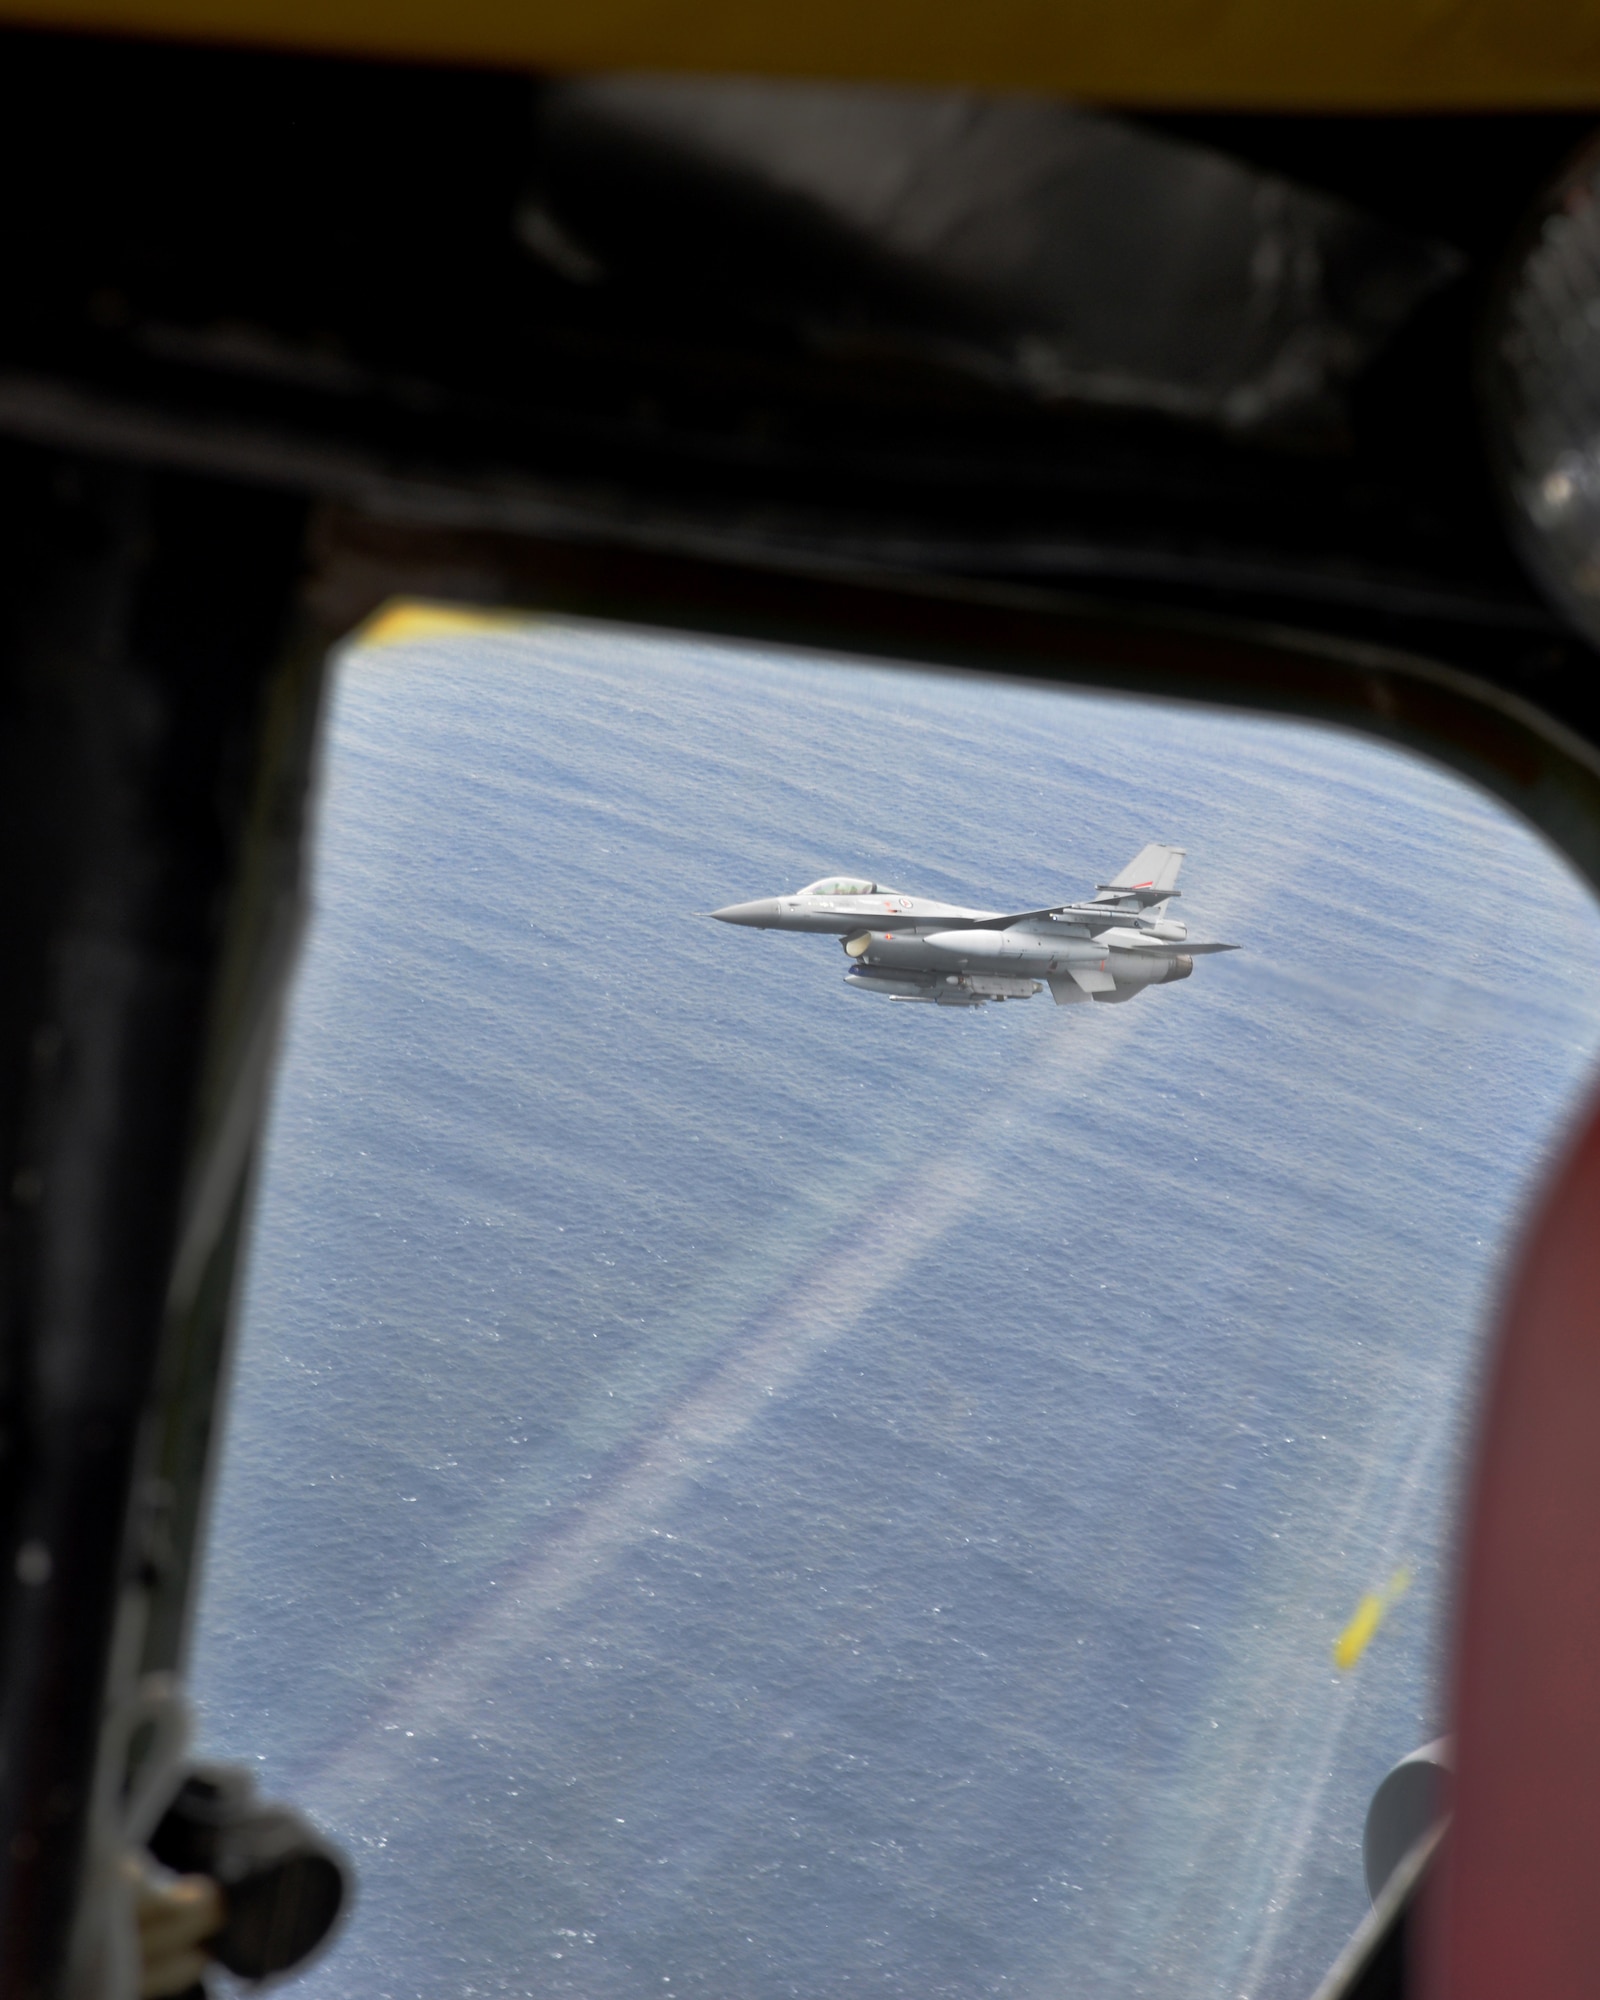 A Royal Norwegian Air Force F-16 Fighting Falcon provides protective escort to a U.S. B-52 Stratofortress during Cold Response 16, March 1, 2016. This year’s iteration of the biennial NATO training exercise took place in the Trøndelag region of Norway, providing a unique extreme-cold environment in which approximately 16,000 troops from a dozen nations worked together to perfect procedures for international military cooperation. (U.S. Air Force photo/Senior Airman Joseph Raatz)